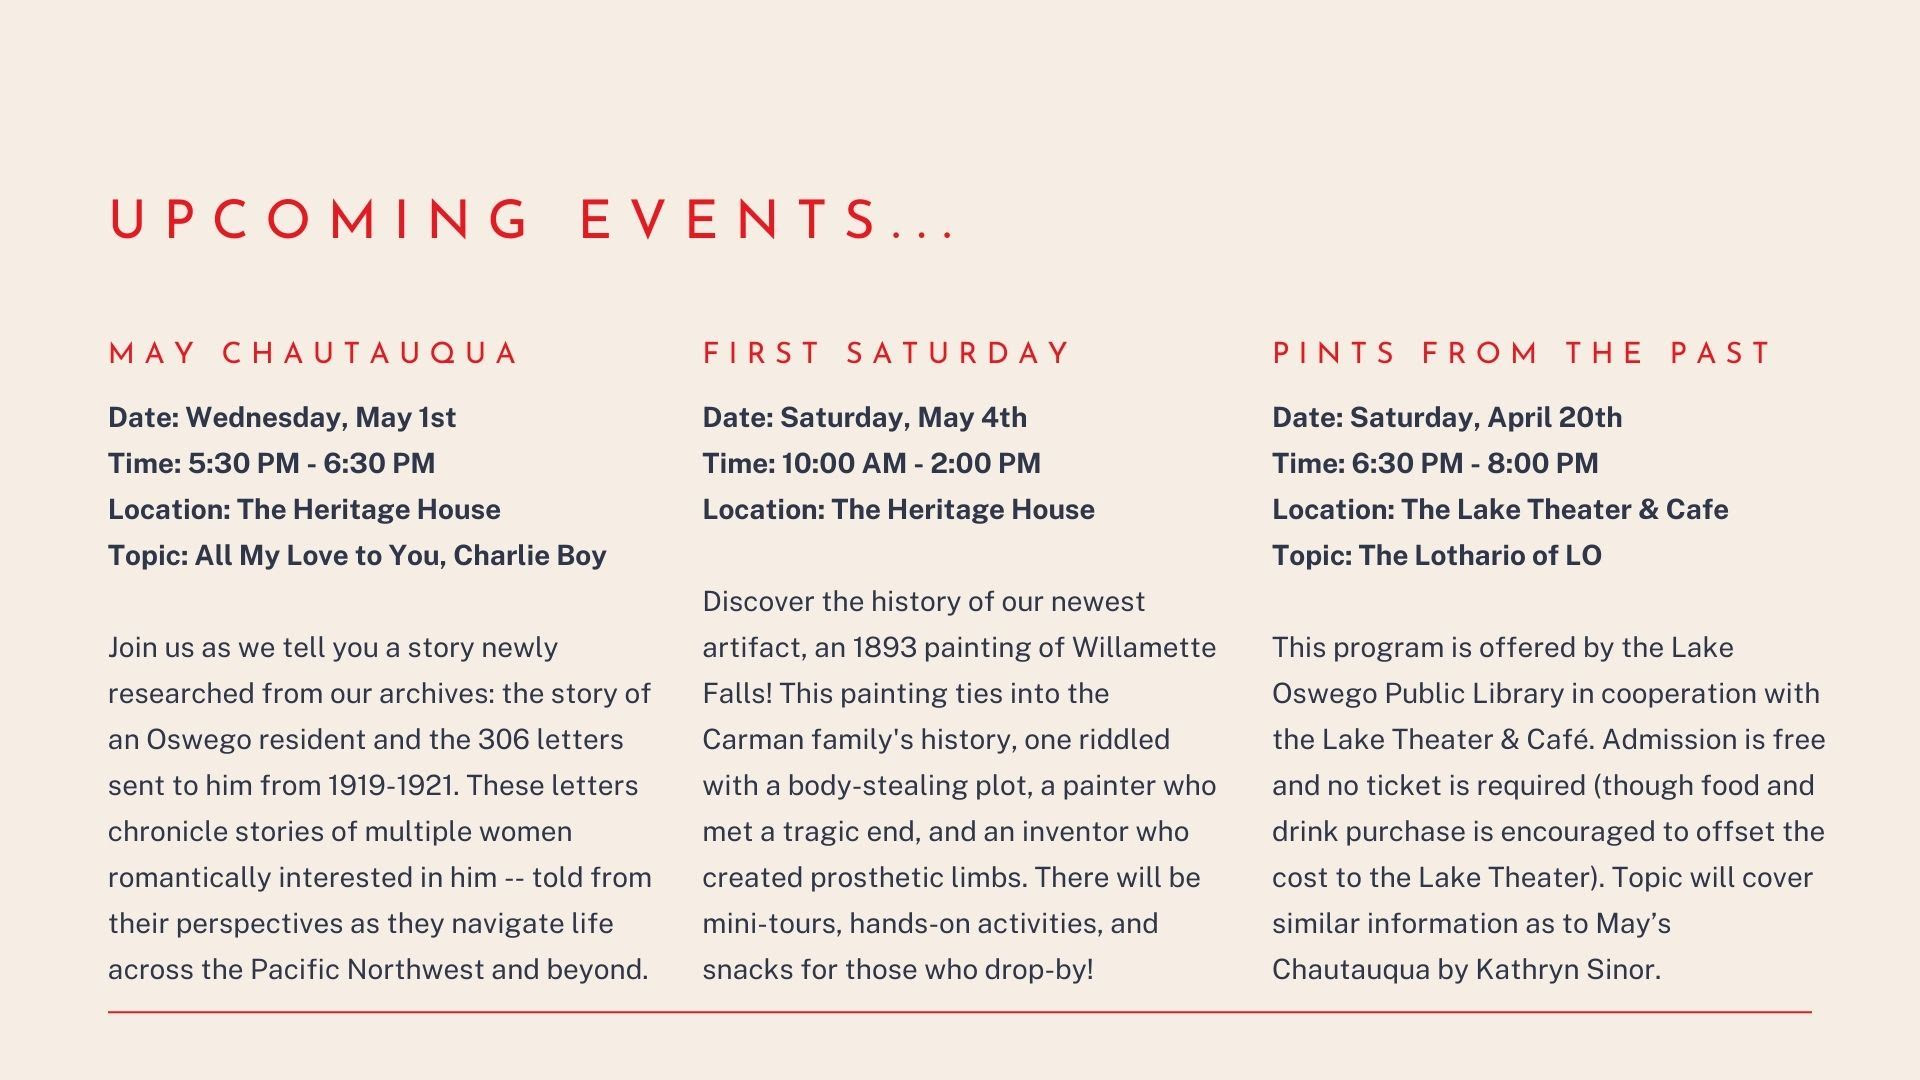 Upcoming events feature May Chautauqua, First Saturday, and Pints from the Past